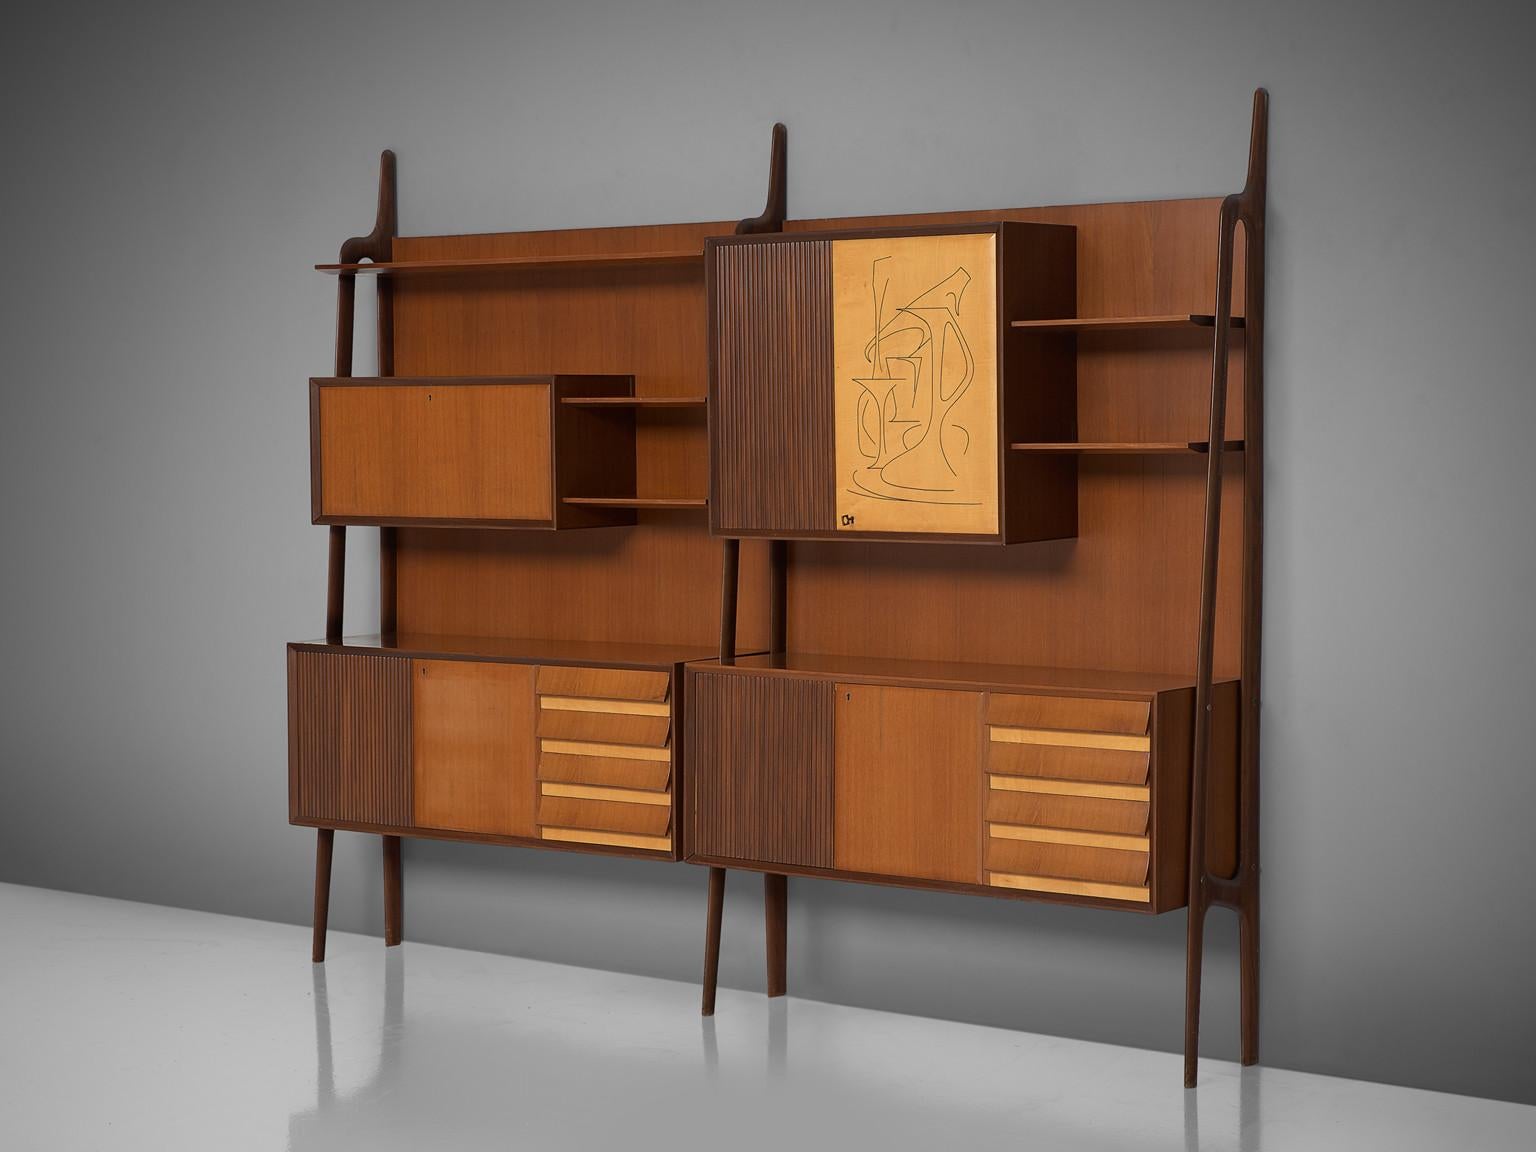 Cabinet, in rosewood, maple, brass and wood, Italy, 1950s.

Rare Italian wall unit in the style of Ico Parisi, Paolo Buffa and Vittorio Dassi on subtle tapered legs. This characteristic Italian cabinet is equipped with doors, drawers, shelves and